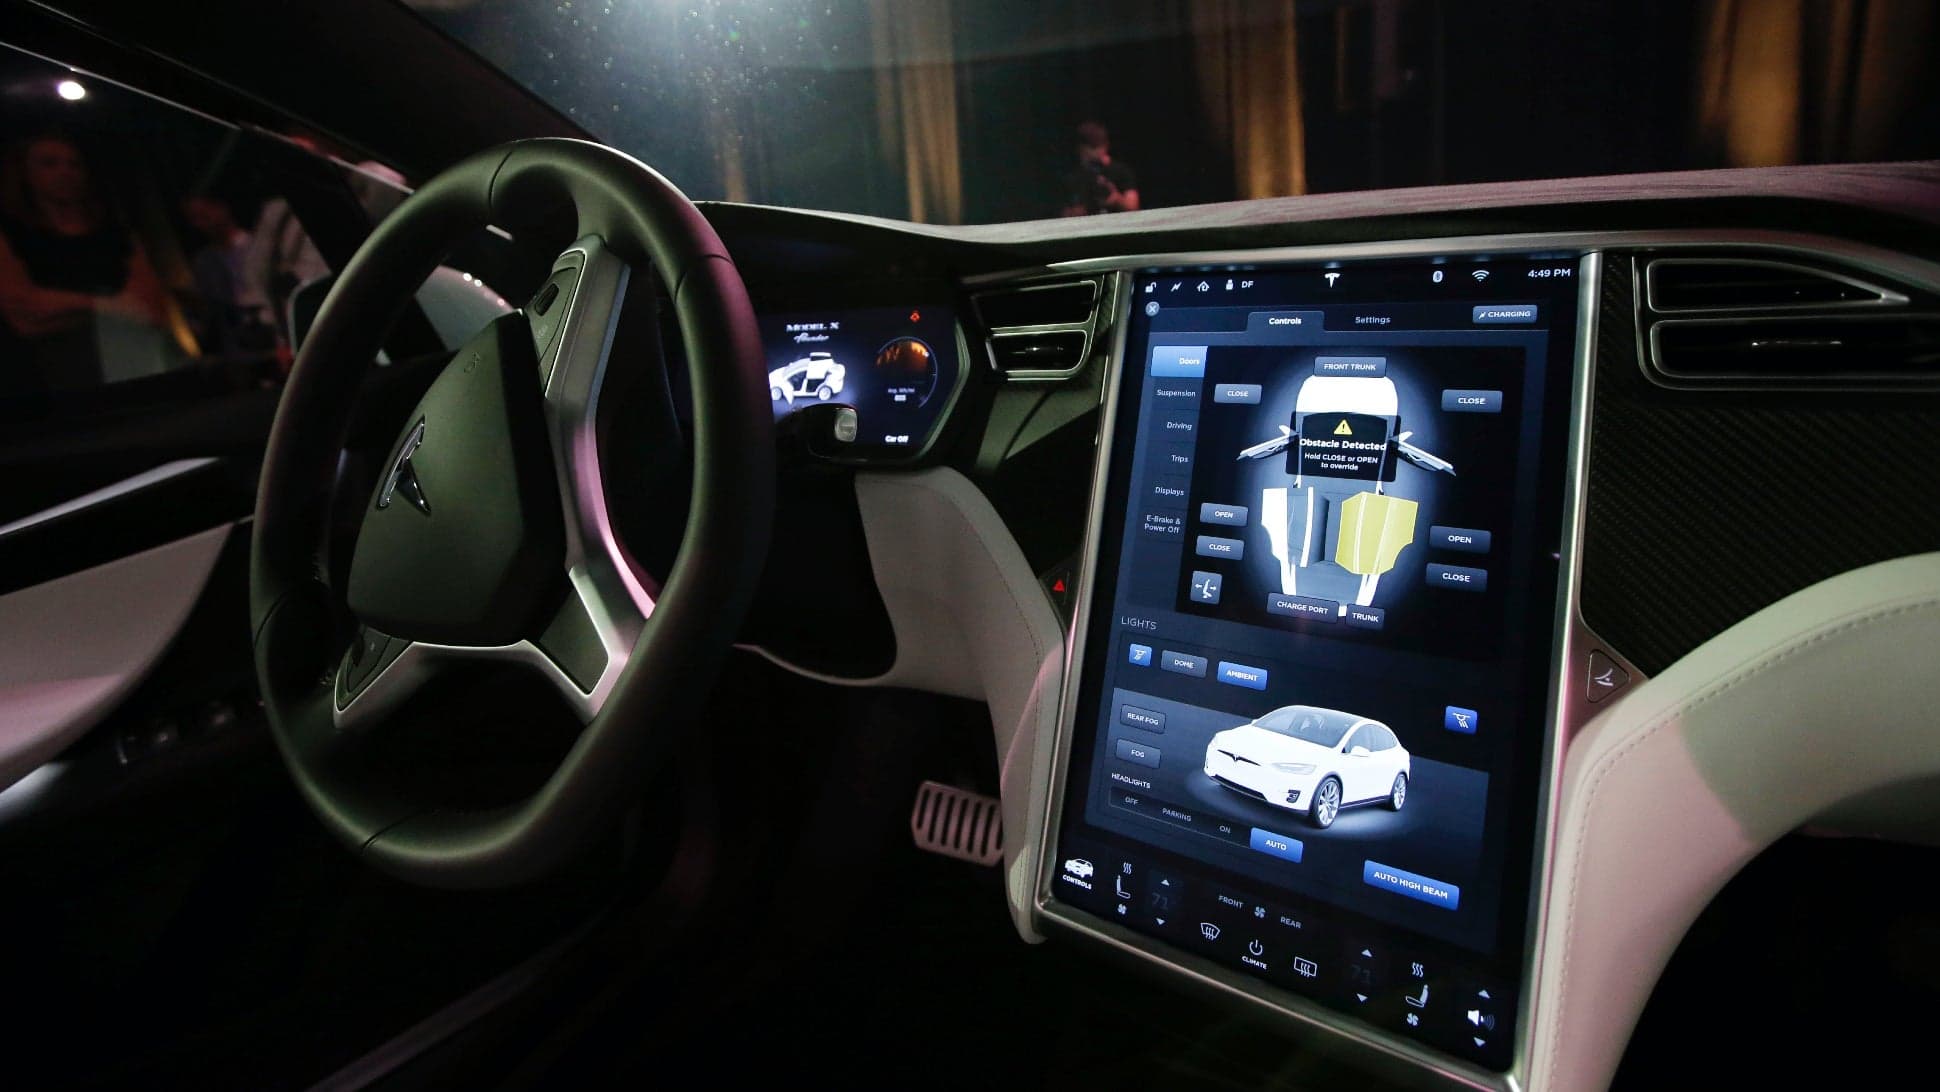 NHTSA Asks Tesla to Recall Roughly 158,000 Model S and Model X Cars Over Failing Touchscreens